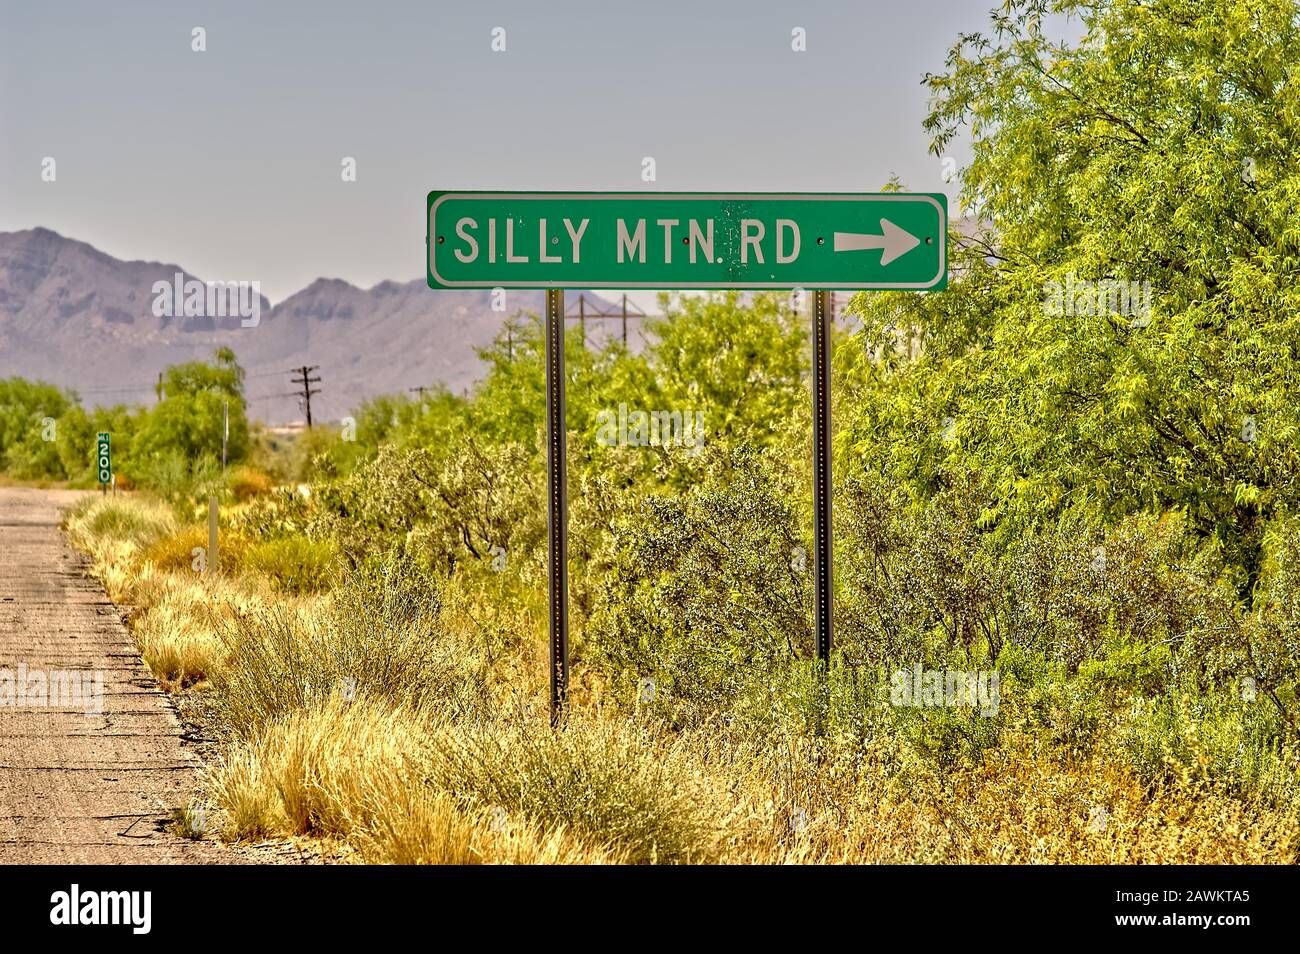 a-silly-named-road-sign-for-a-mountain-road-in-arizona-near-apache-junction-2AWKTA5.jpg